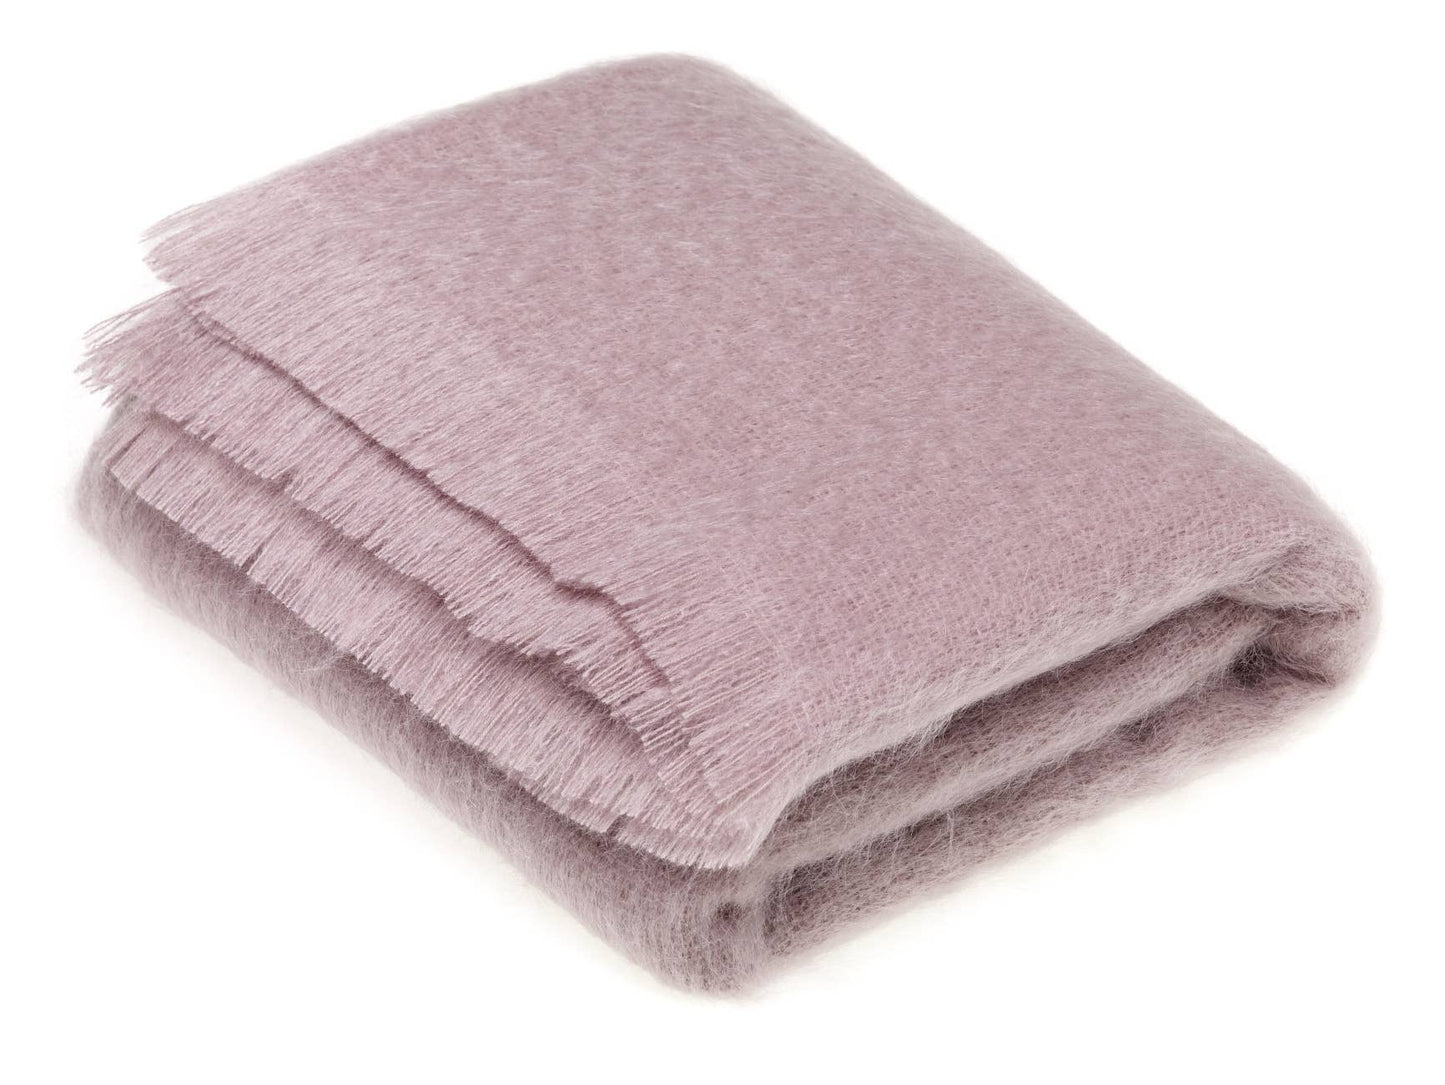 Luxury Mohair Throw Collection - Made in England: Squirrel Gray